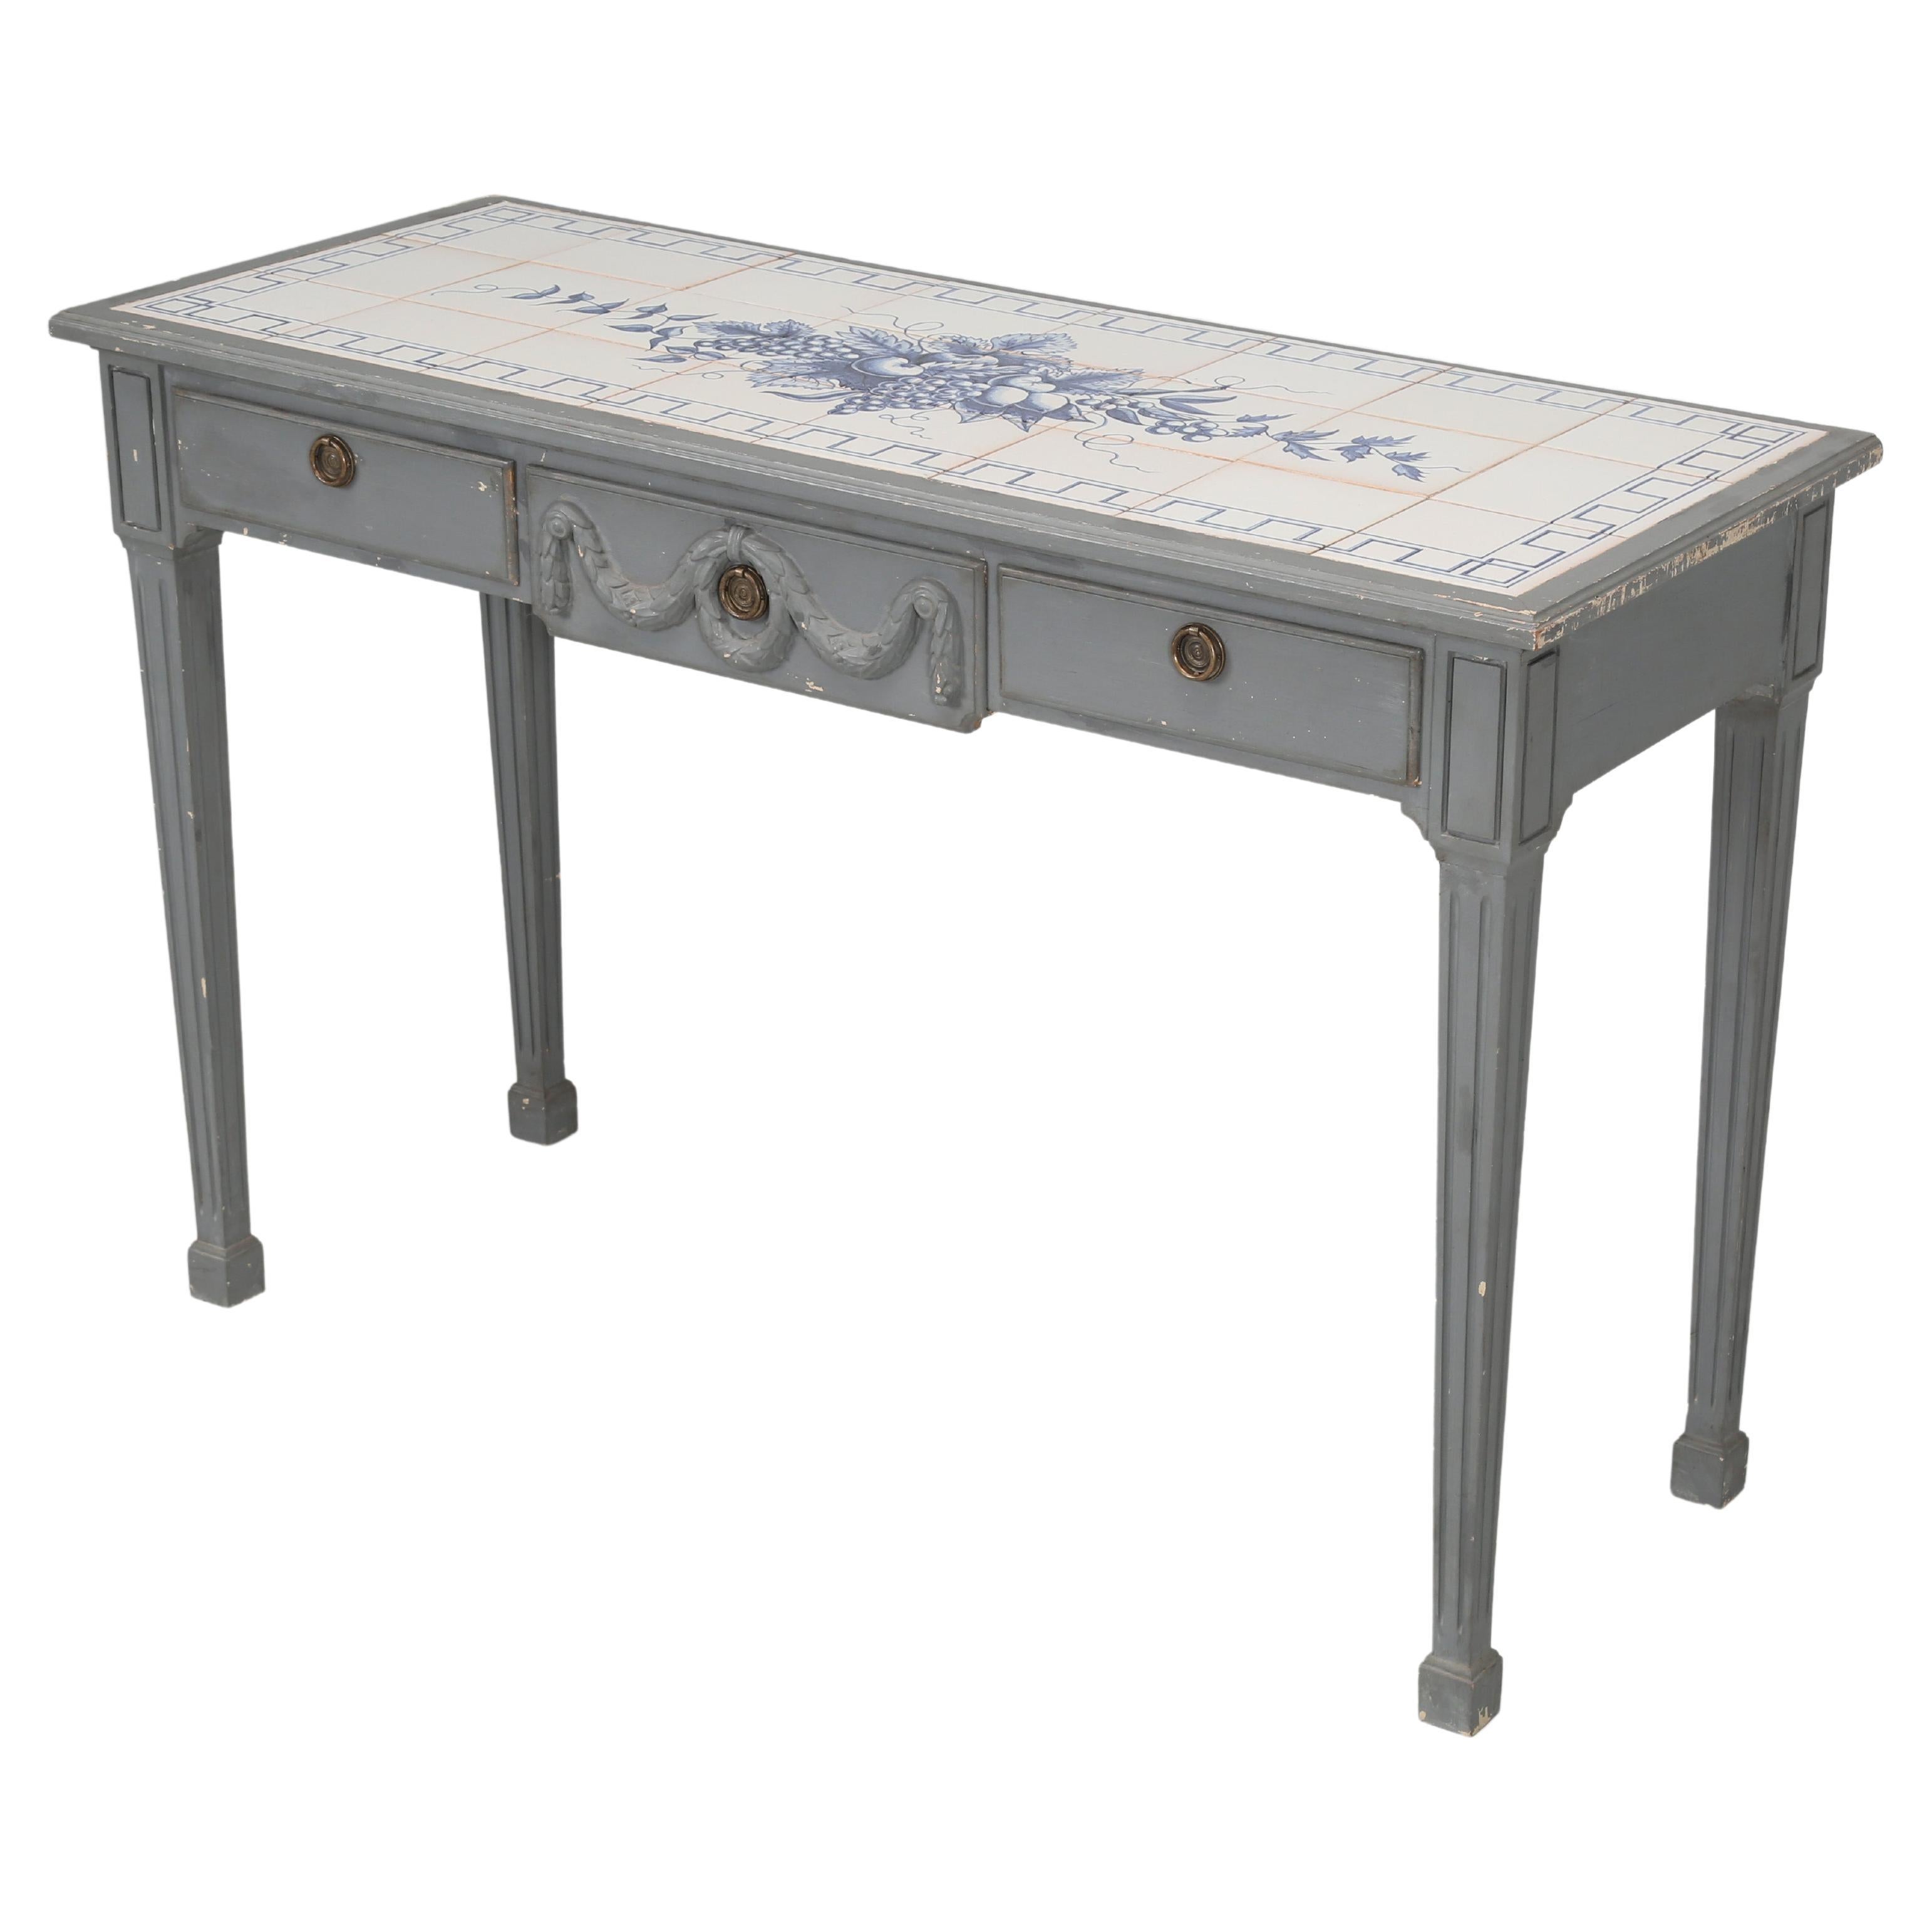 Vintage Swedish Painted Console Table with Inlaid Tile Top and Three Drawers For Sale